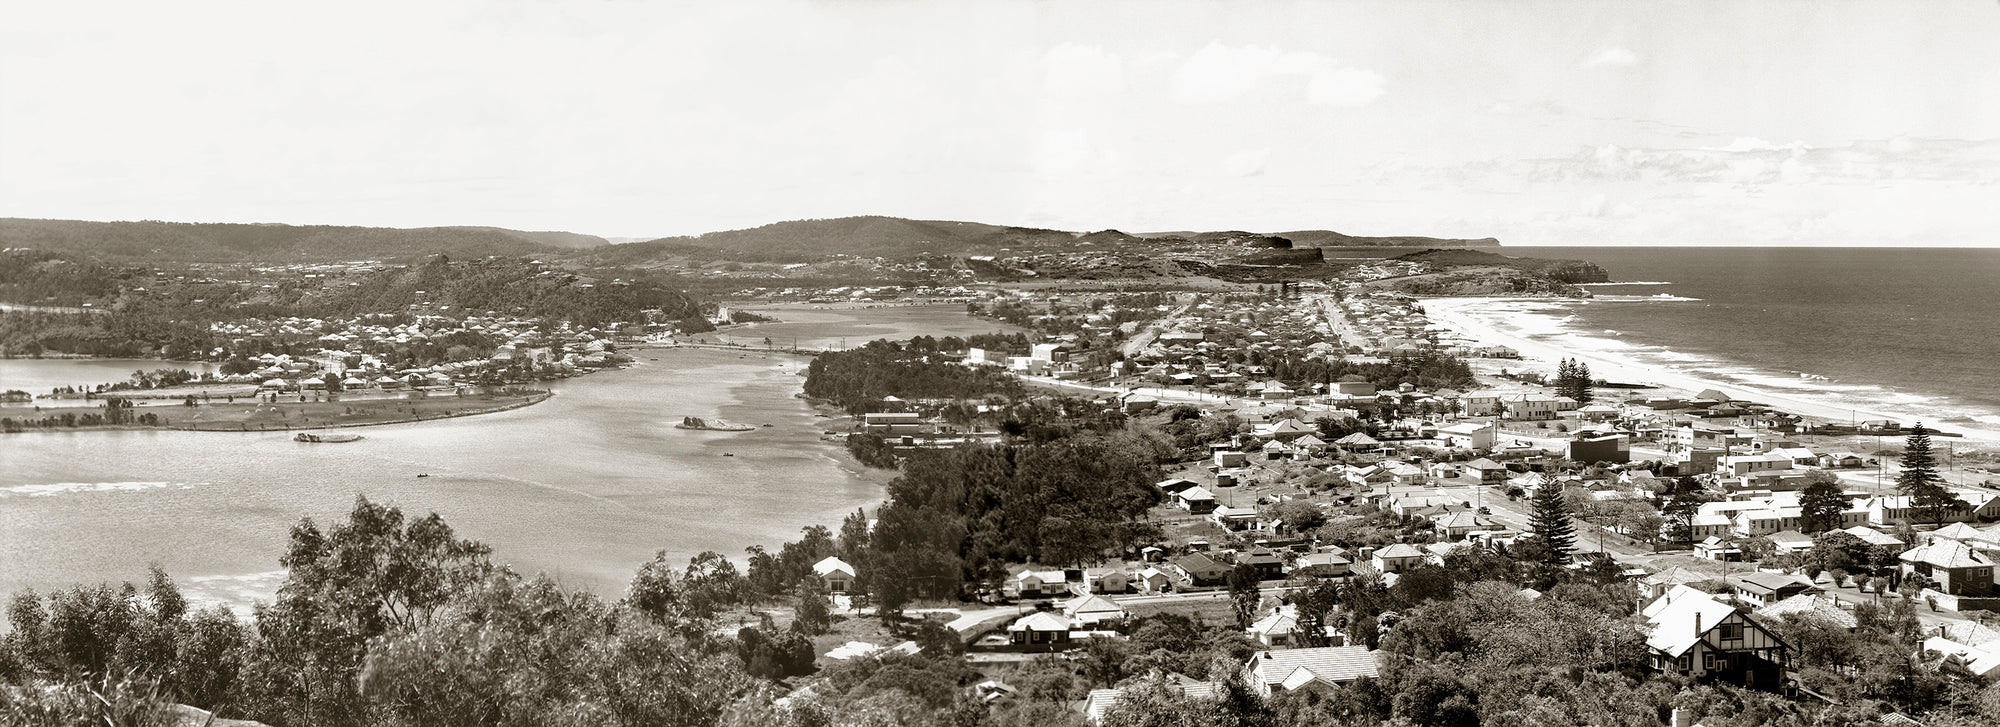 Narrabeen And Lake From Collaroy Plateau, Narrabeen NSW Australia 1950s